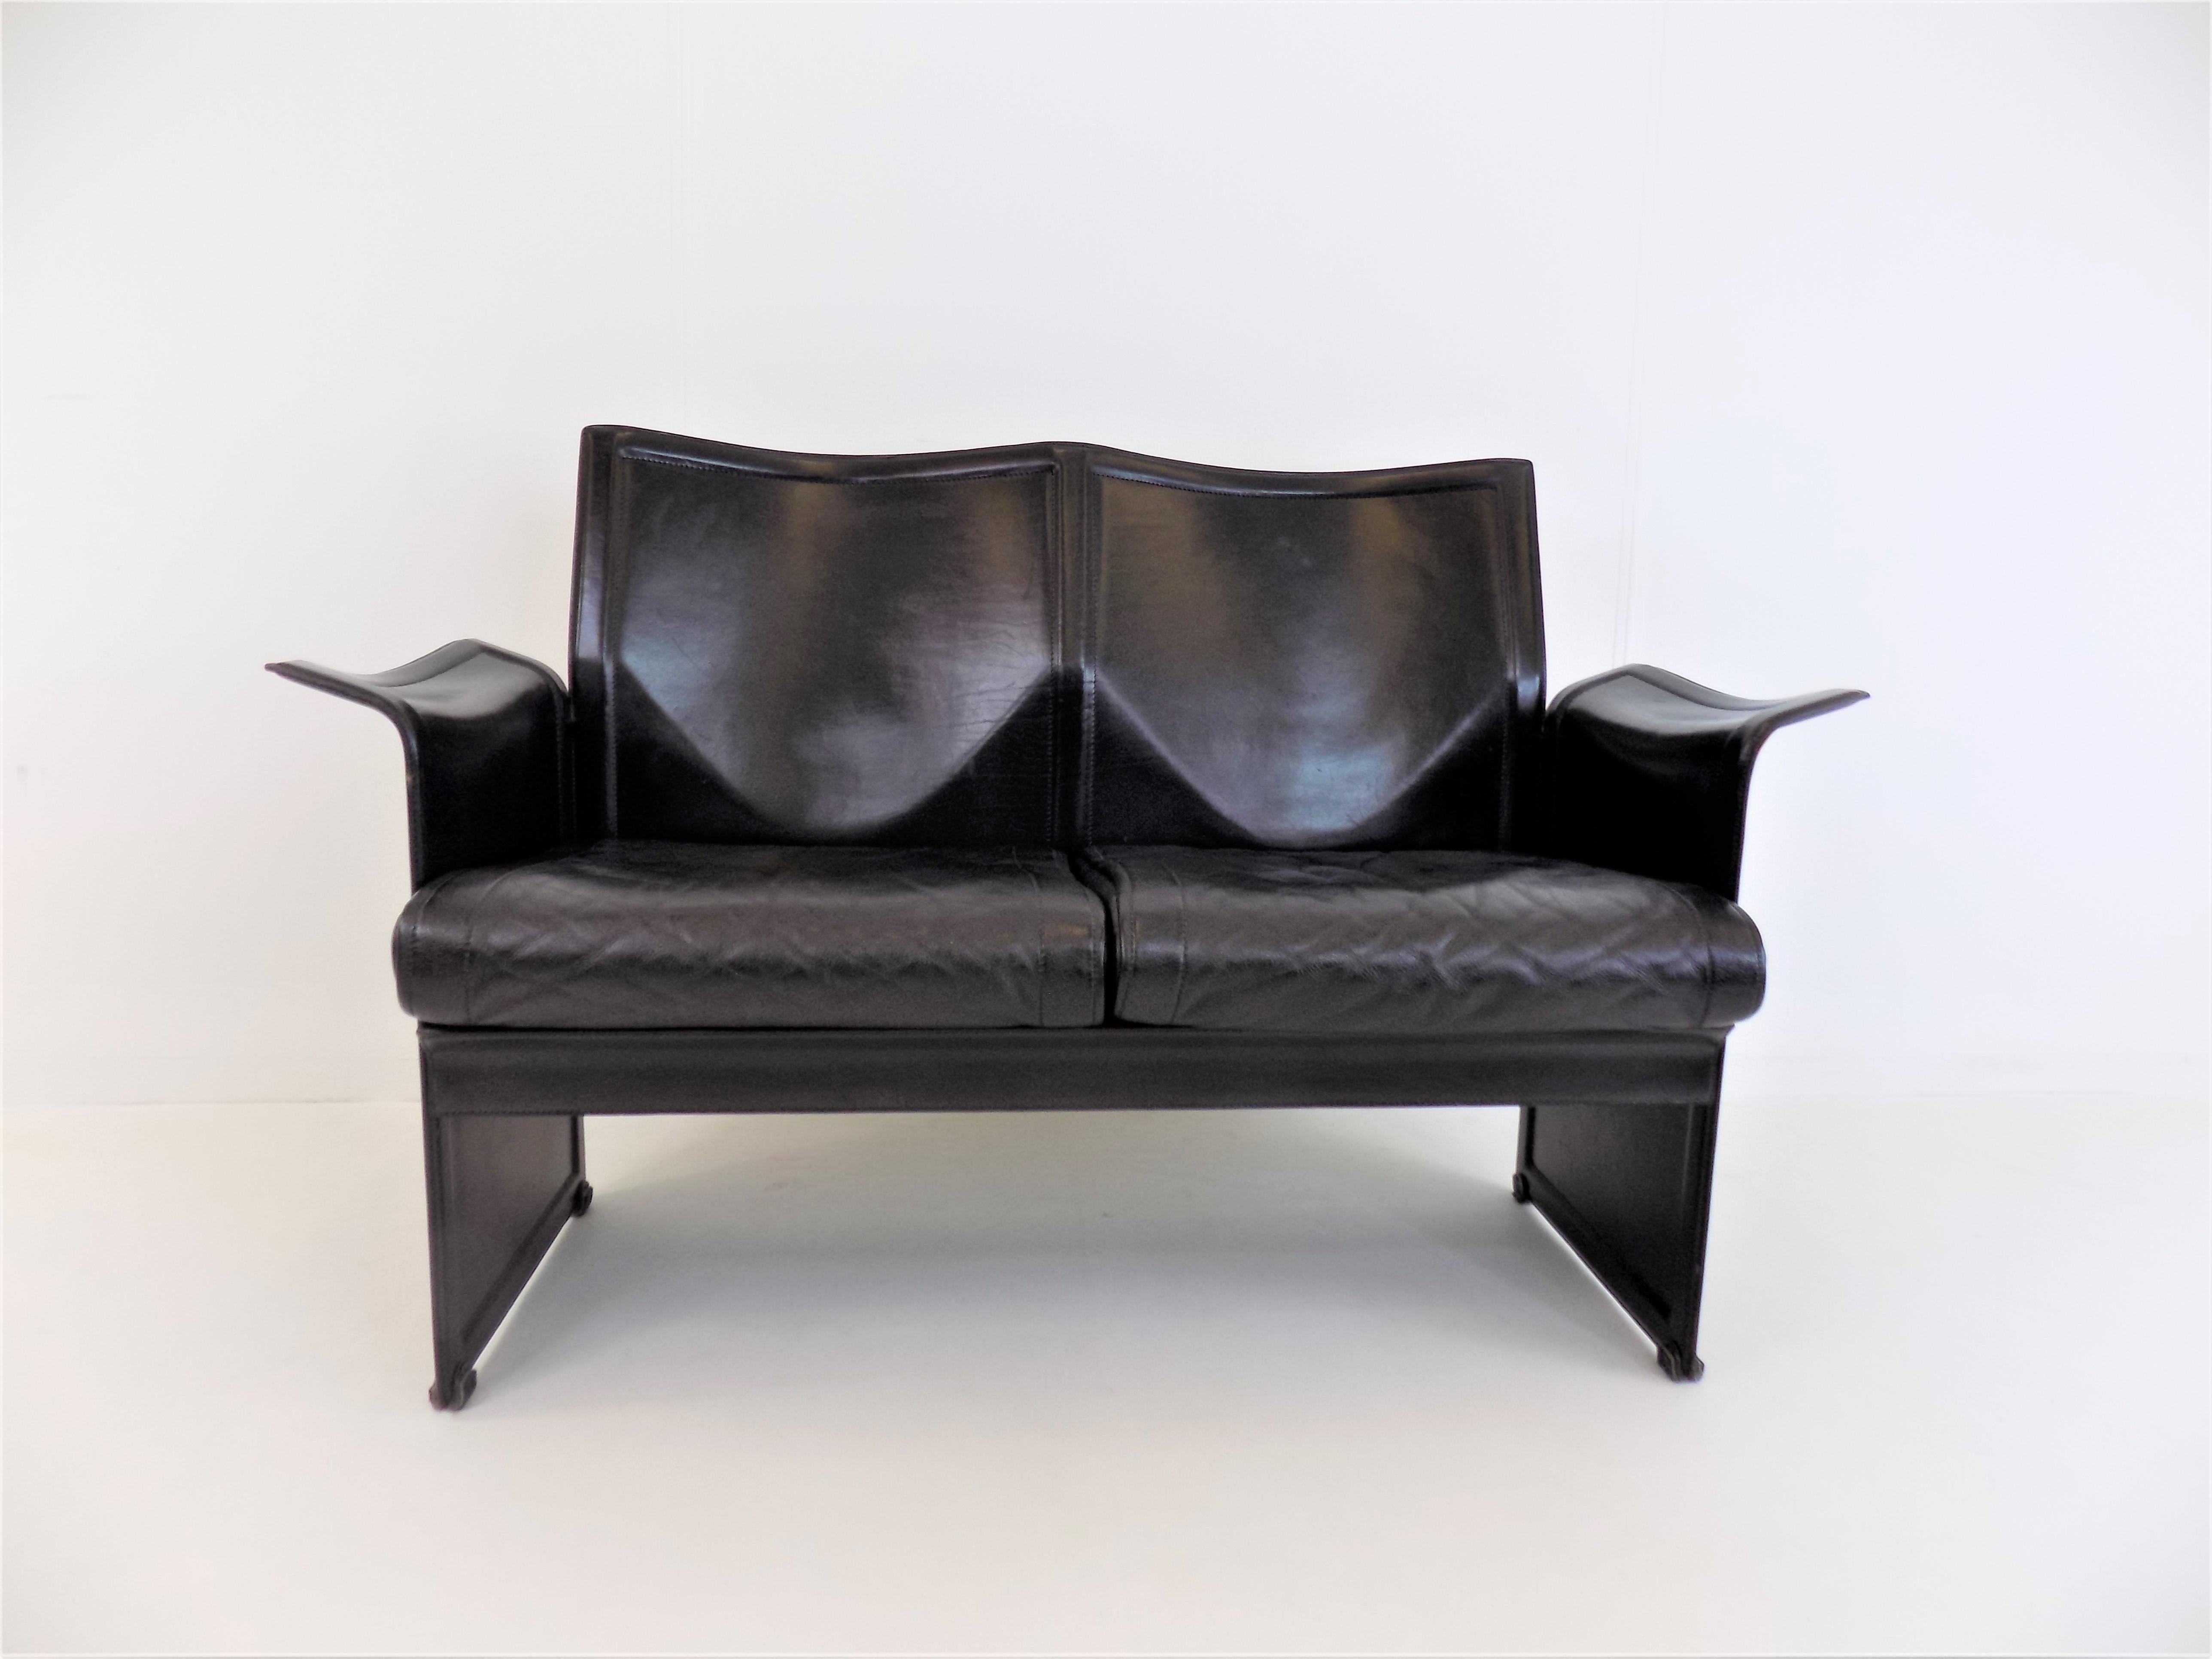 The series designed by Tito Agnoli for Matteo Grassi in the 70s is an absolutely timeless design that still fits into every living room today. This black leather 2 seater is in very good condition. The leather of the frame, as well as the seat